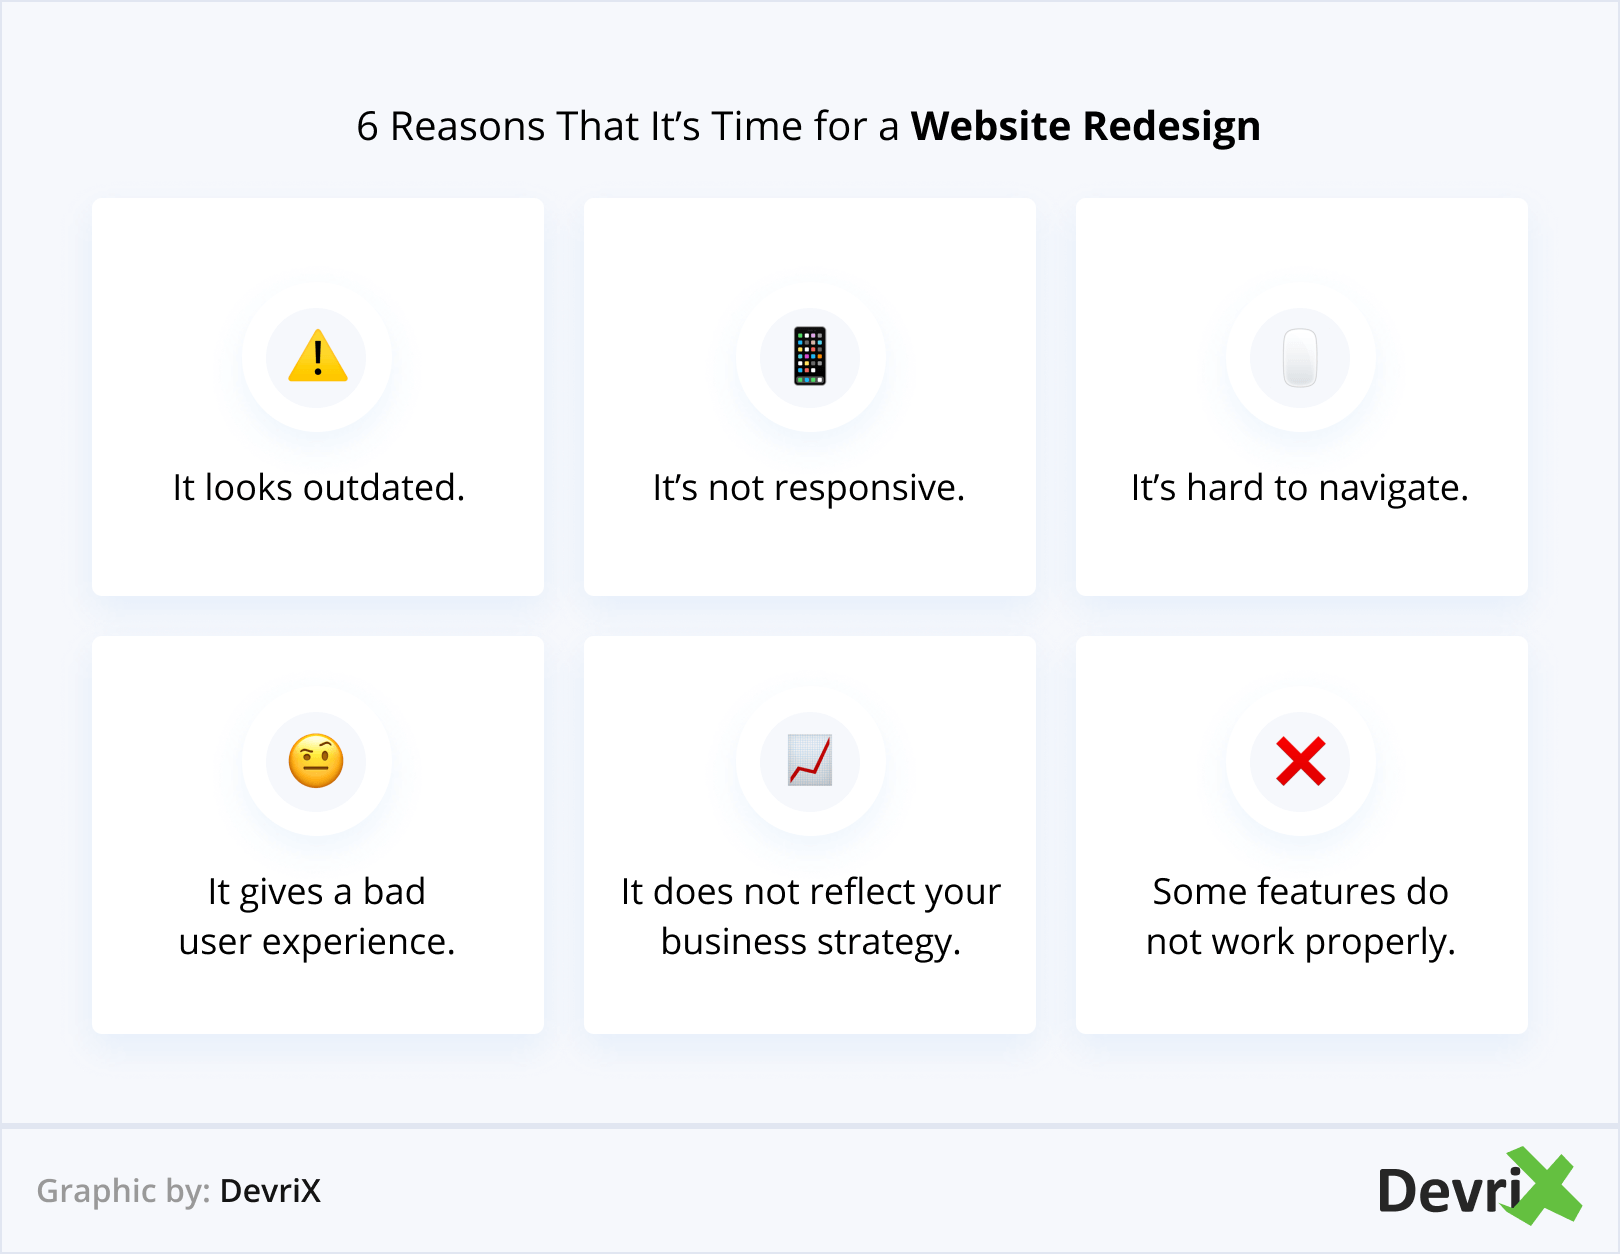 6 Reasons That It’s Time for a Website Redesign